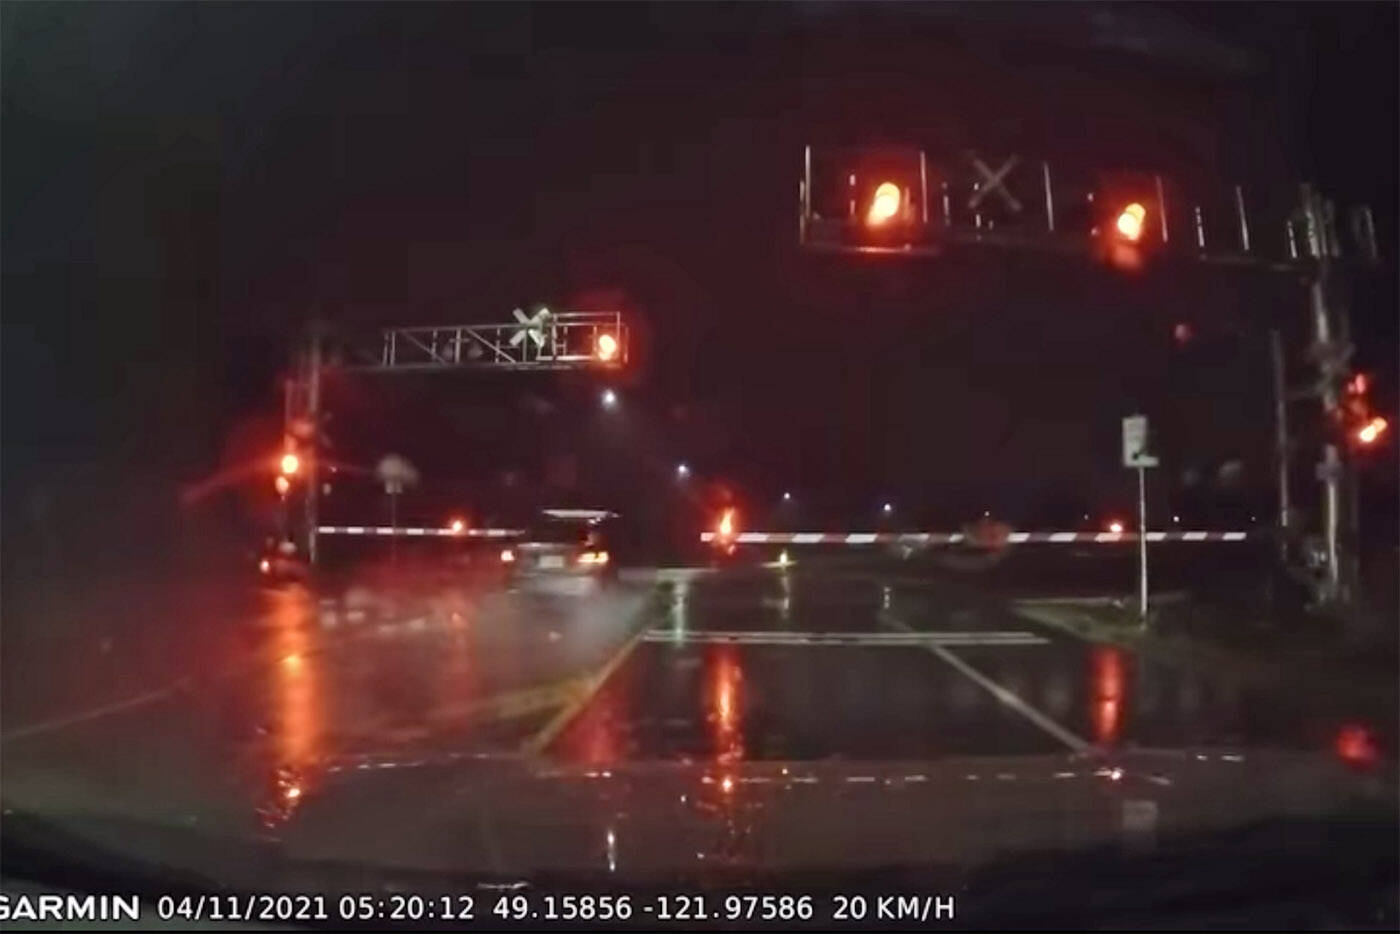 In this screen grab, a vehicle is seen racing through a CN Rail crossing in Chilliwack on the morning of Thursday, Nov. 4, 2021. The dashcam footage was captured by Mike Ervin. (Facebook/ Mike Ervin)